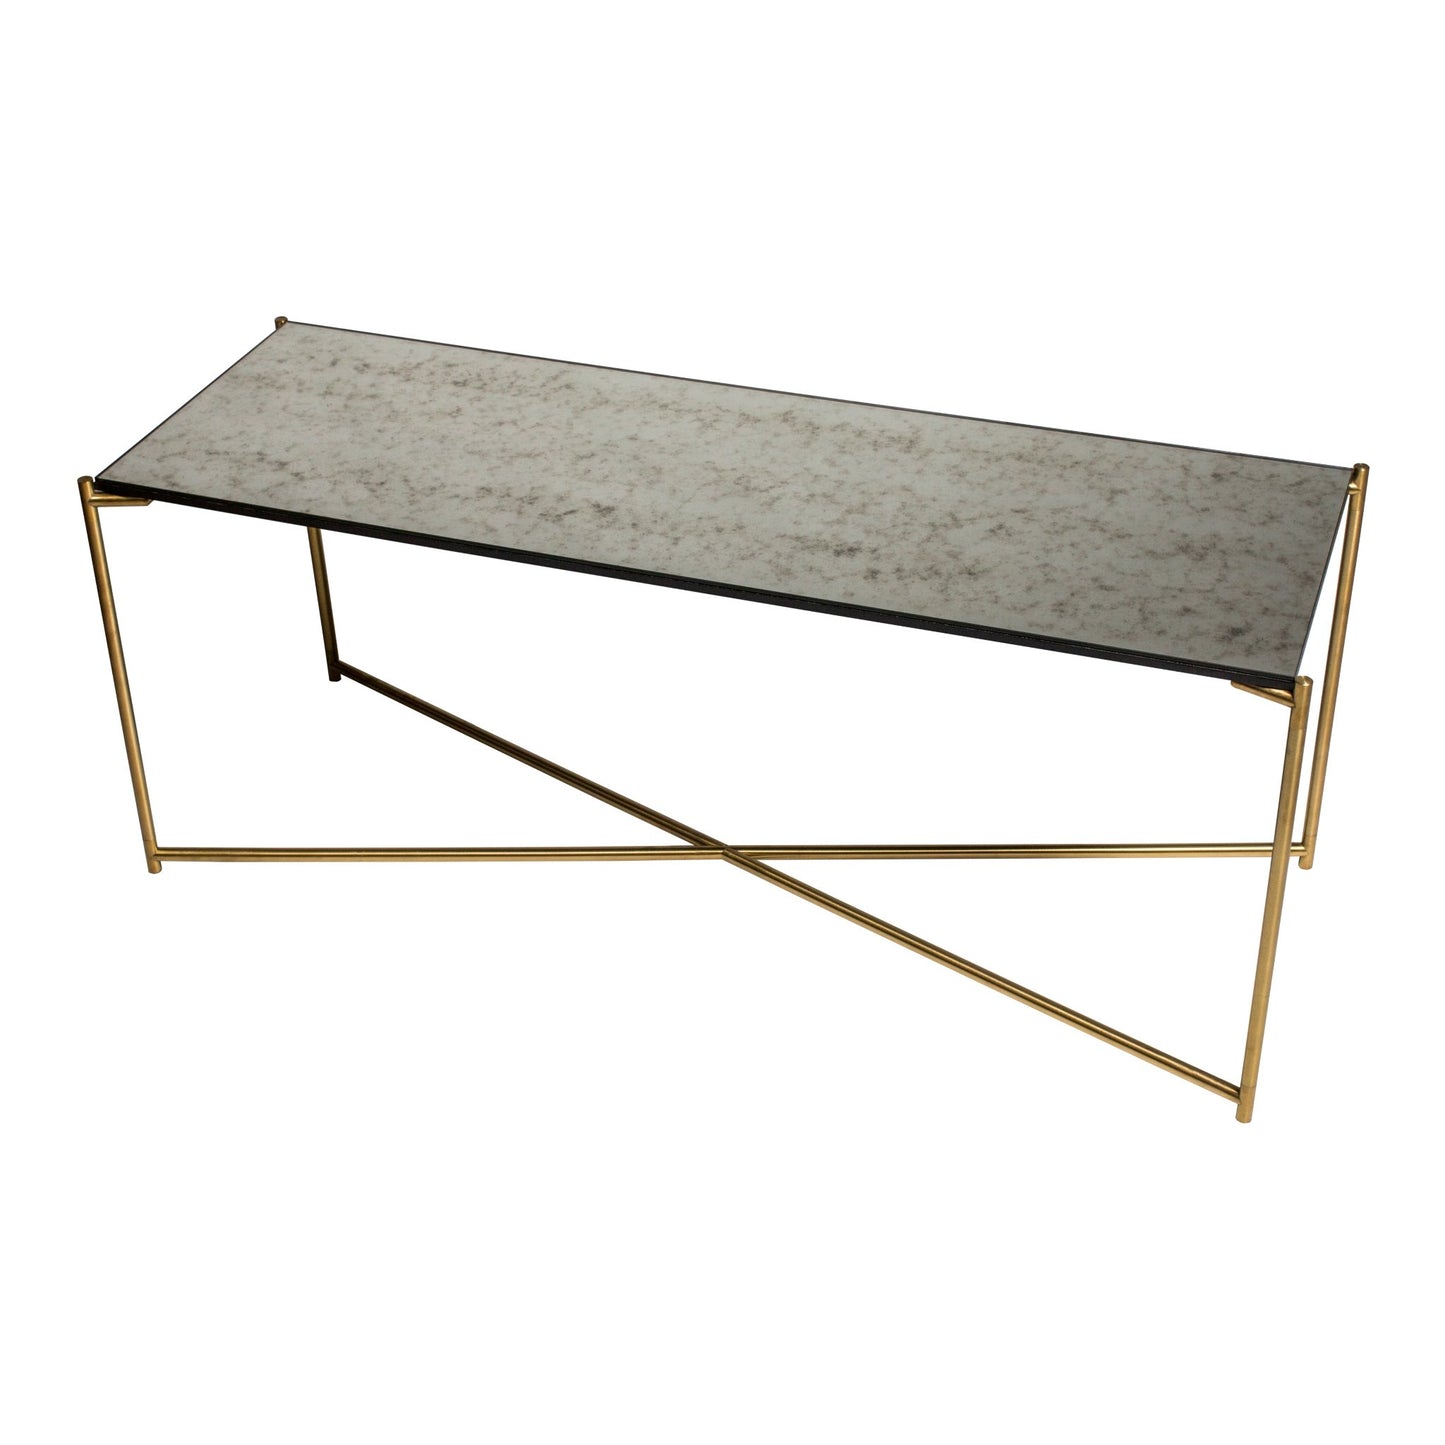 Iris Large TV Stand - Antiqued Glass & Brass Frame